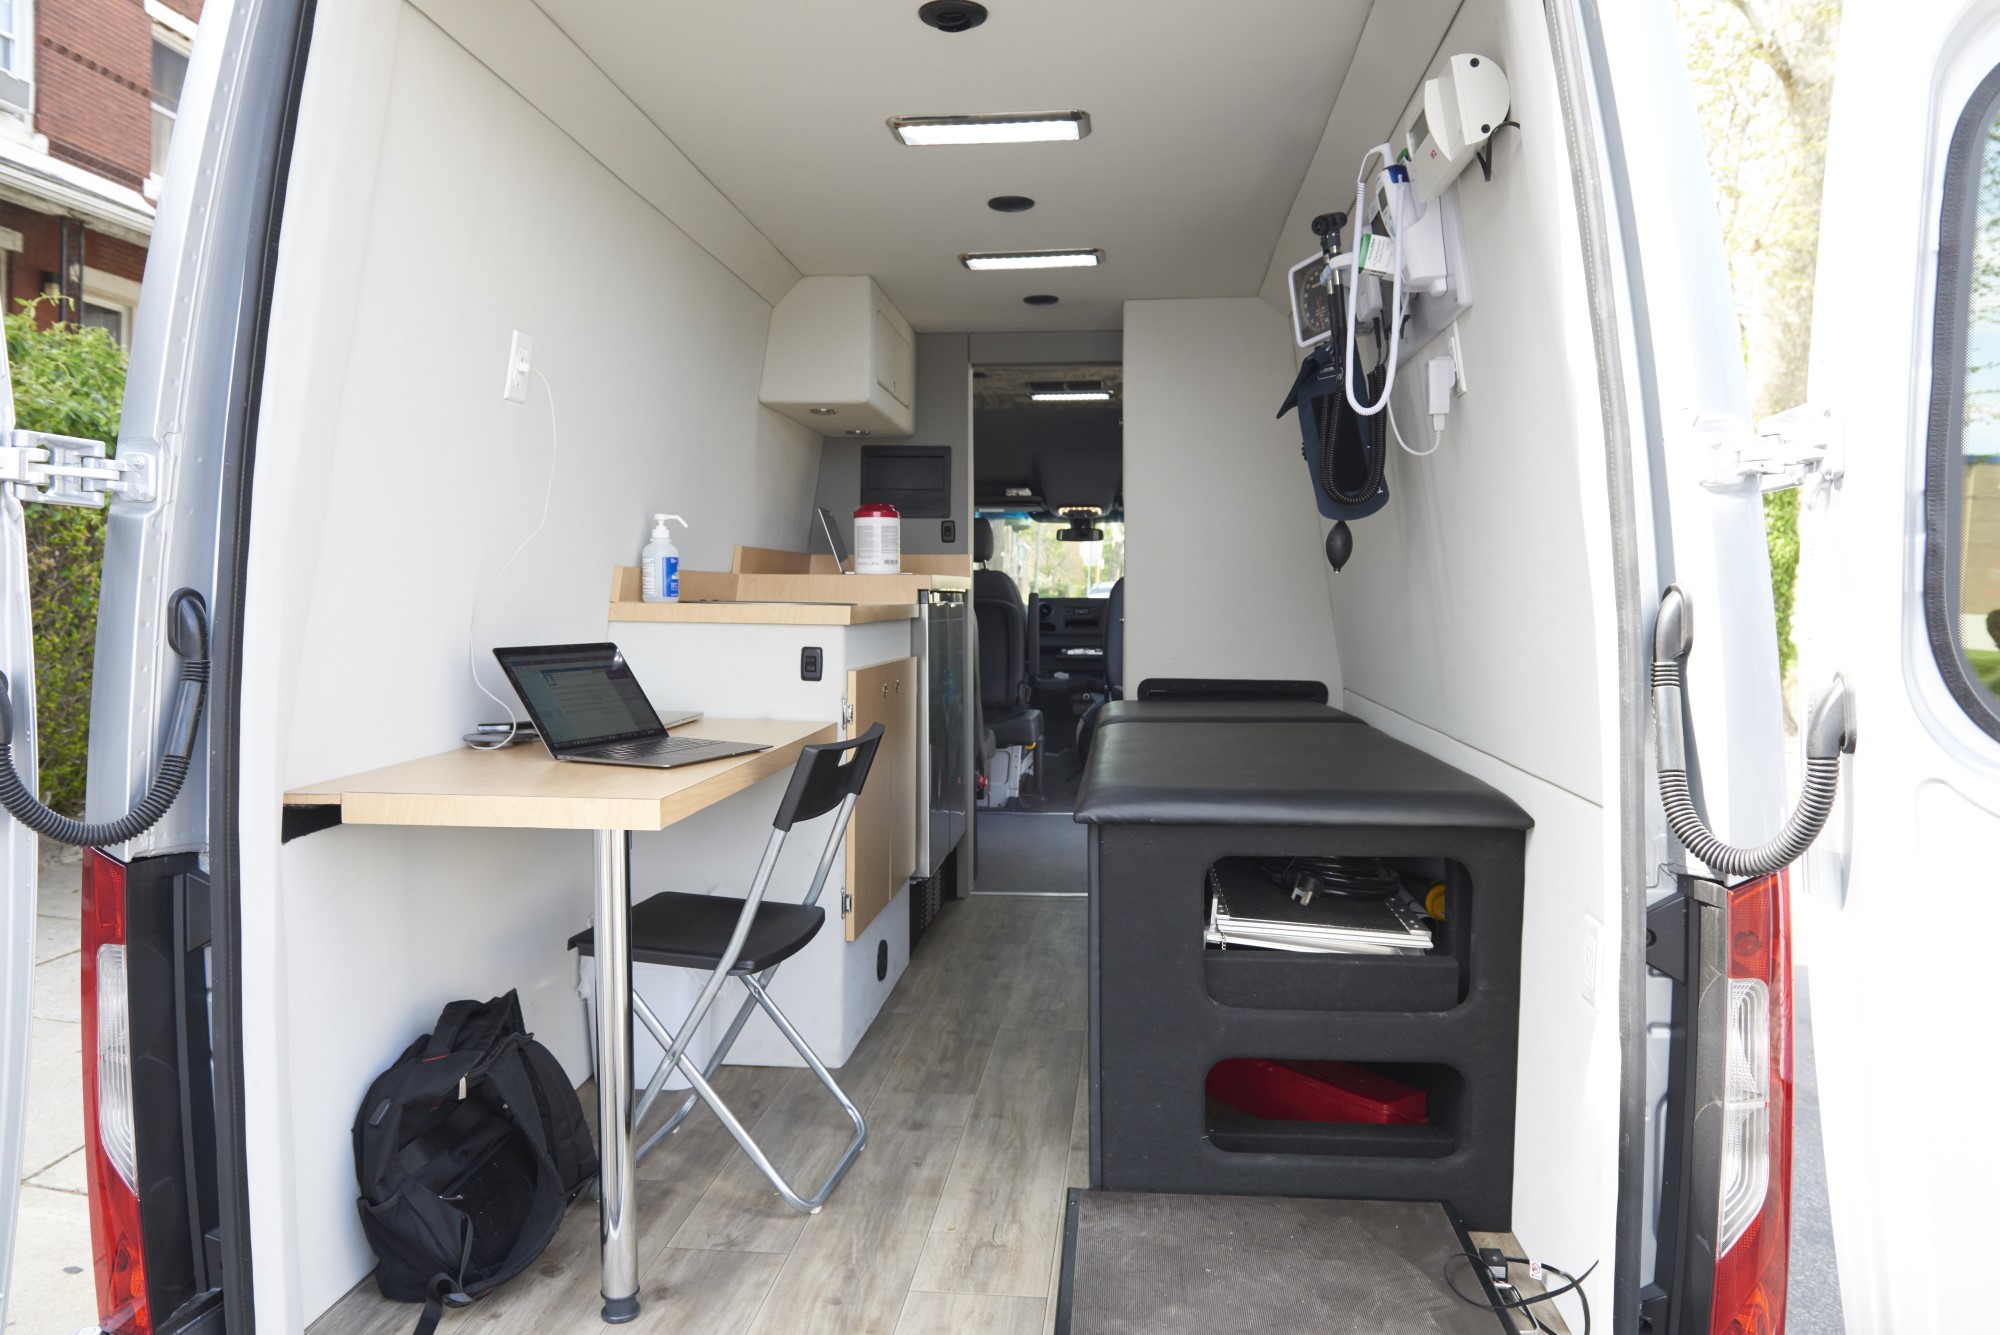 Sayre medical van interior with desk and counter